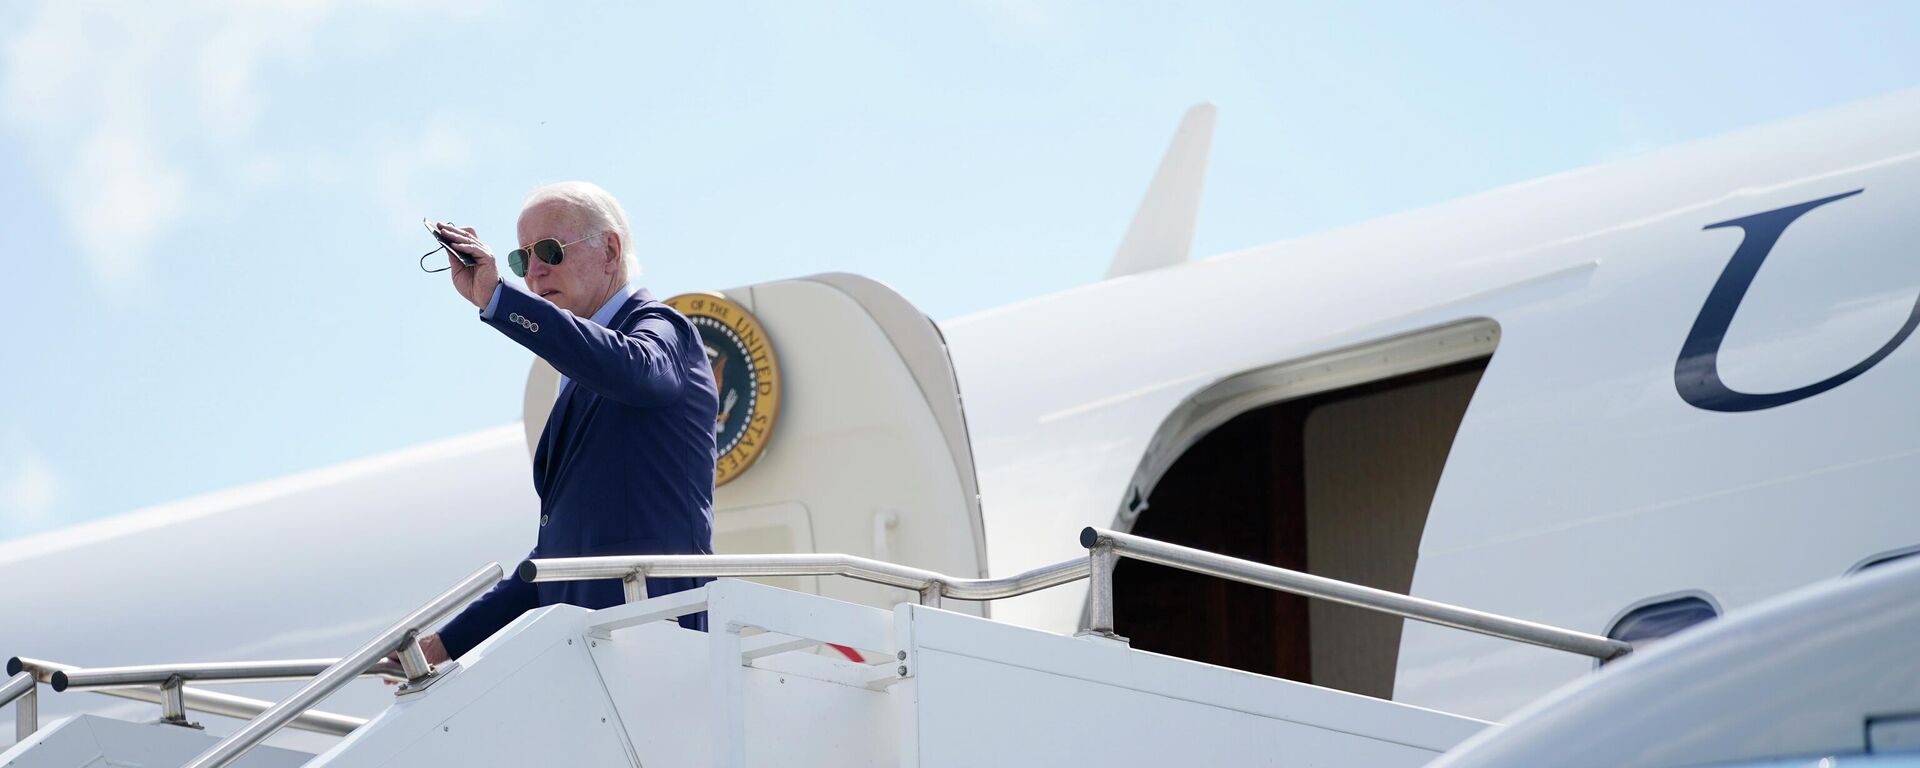 President Joe Biden waves as he boards Air Force One at Blue Grass Airport, Monday, Aug. 8, 2022, in Lexington, Ky., after spending the day viewing flood damage in the state. - Sputnik International, 1920, 12.08.2022